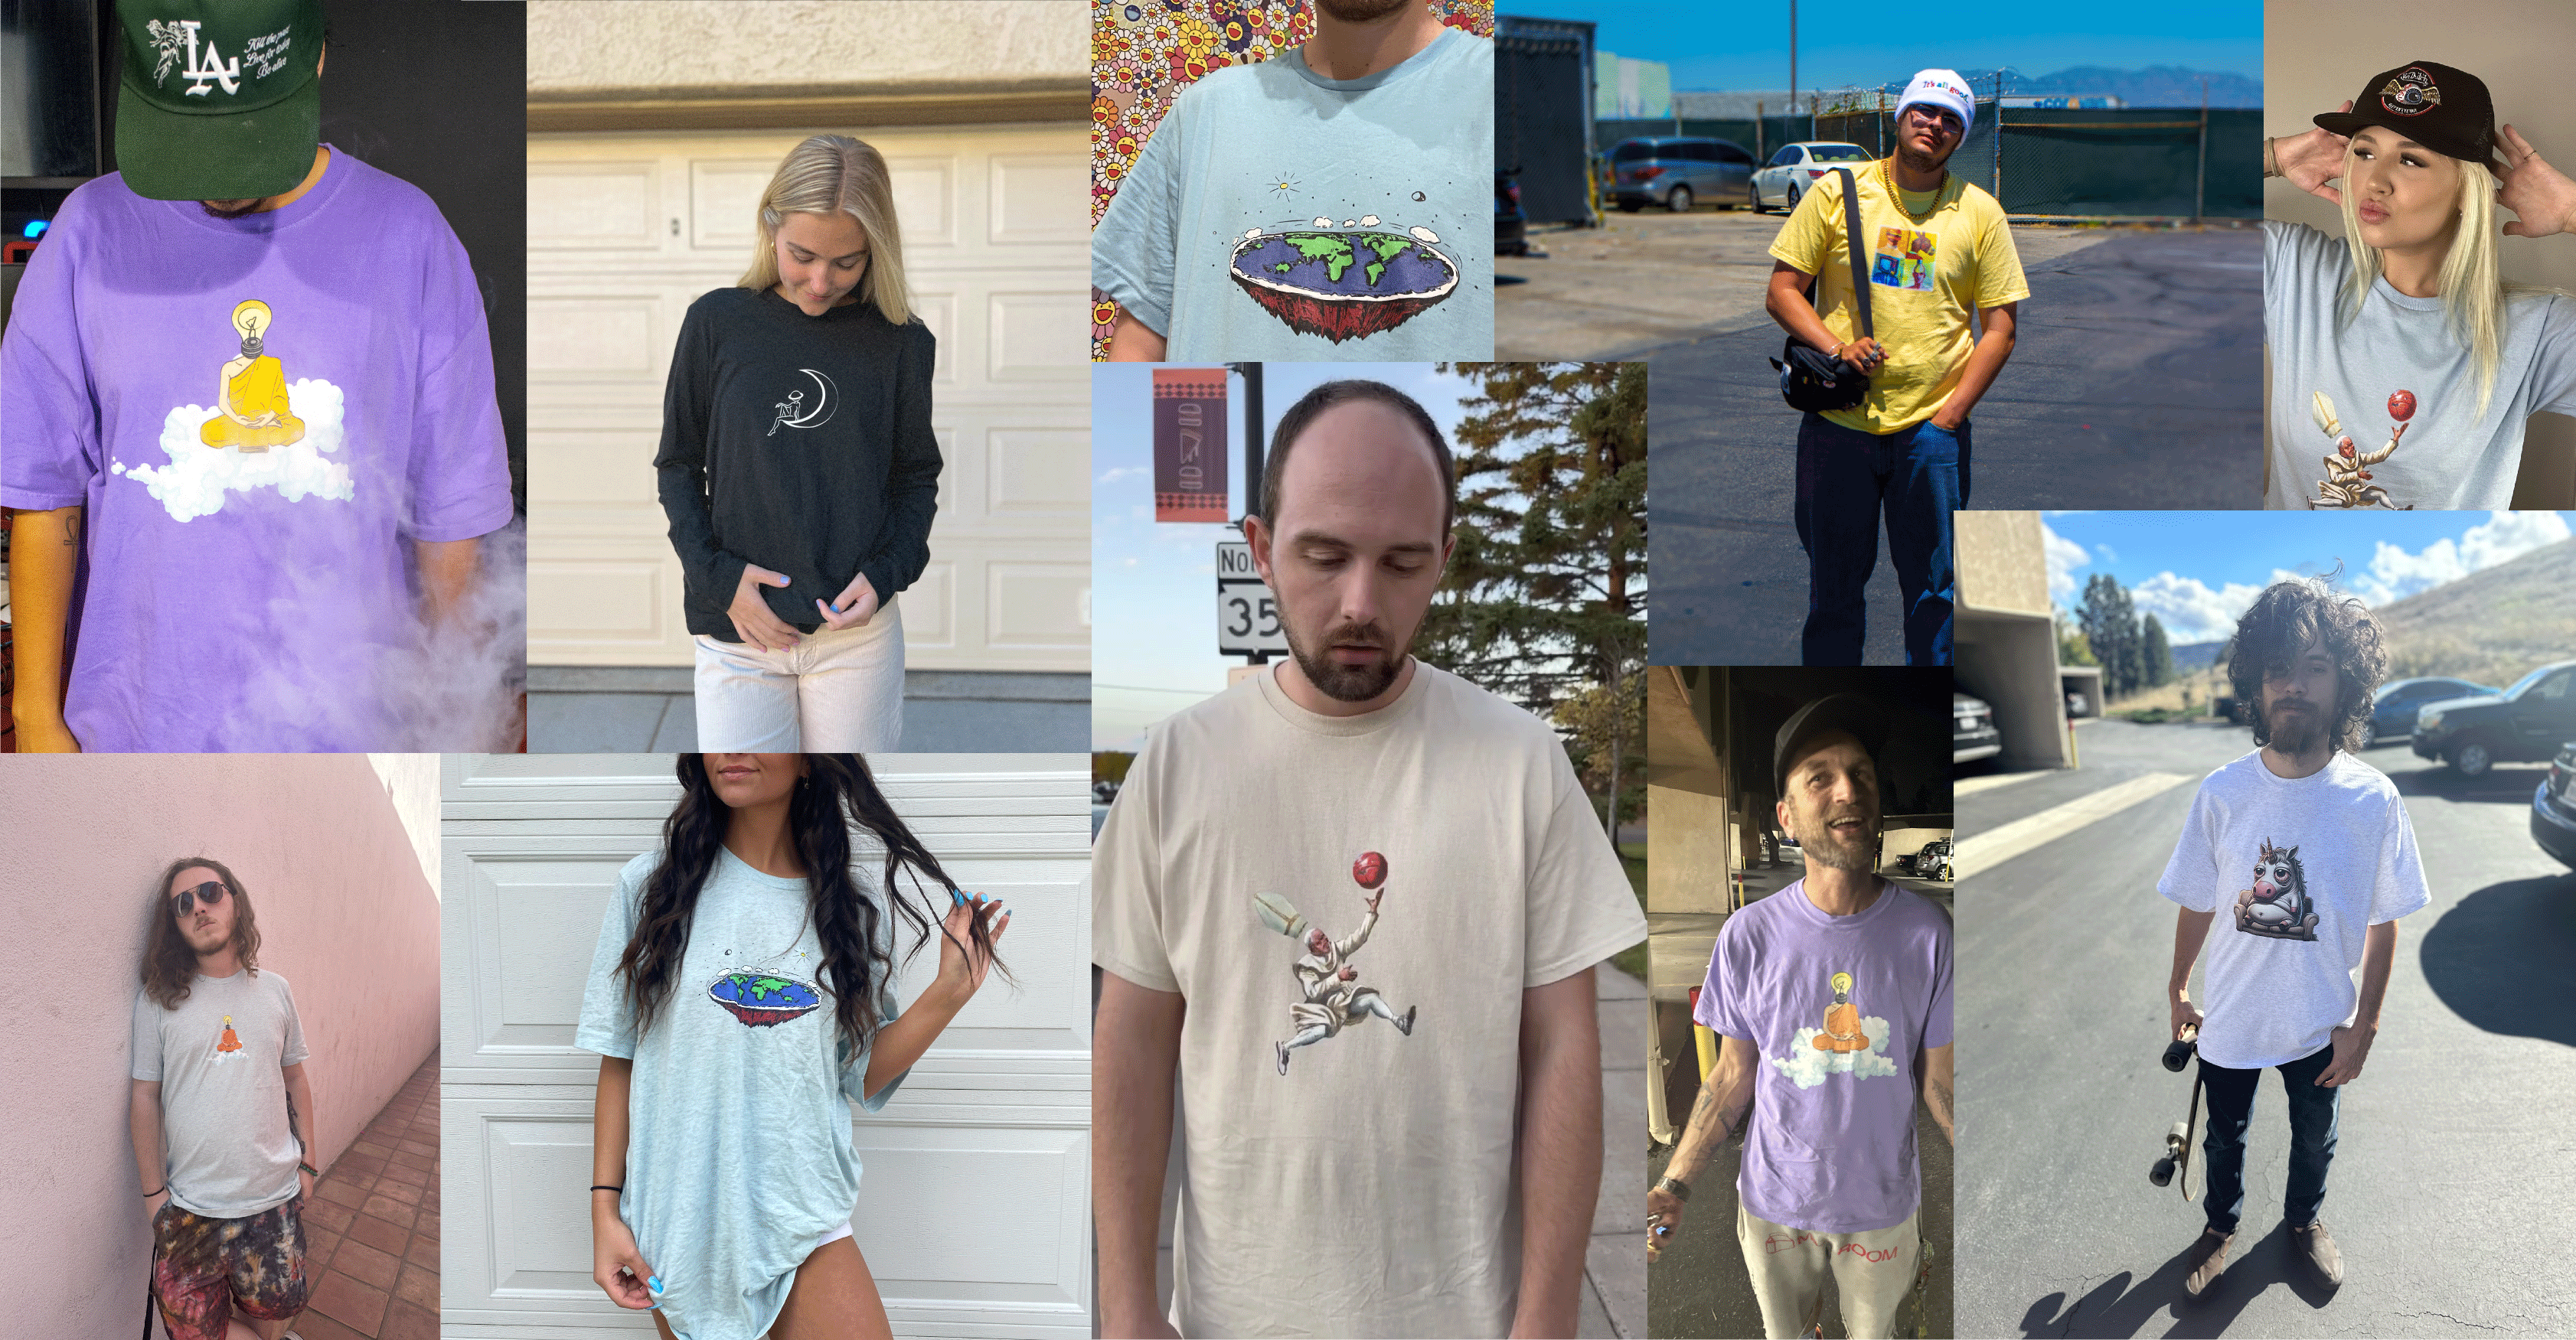 Happy customers showcasing their unique style in a vibrant collage of Top Shelf Tee's diverse and creative t-shirt designs, including TV head, unicorn, cool cat, and more, expressing individuality and the joy of wearing art